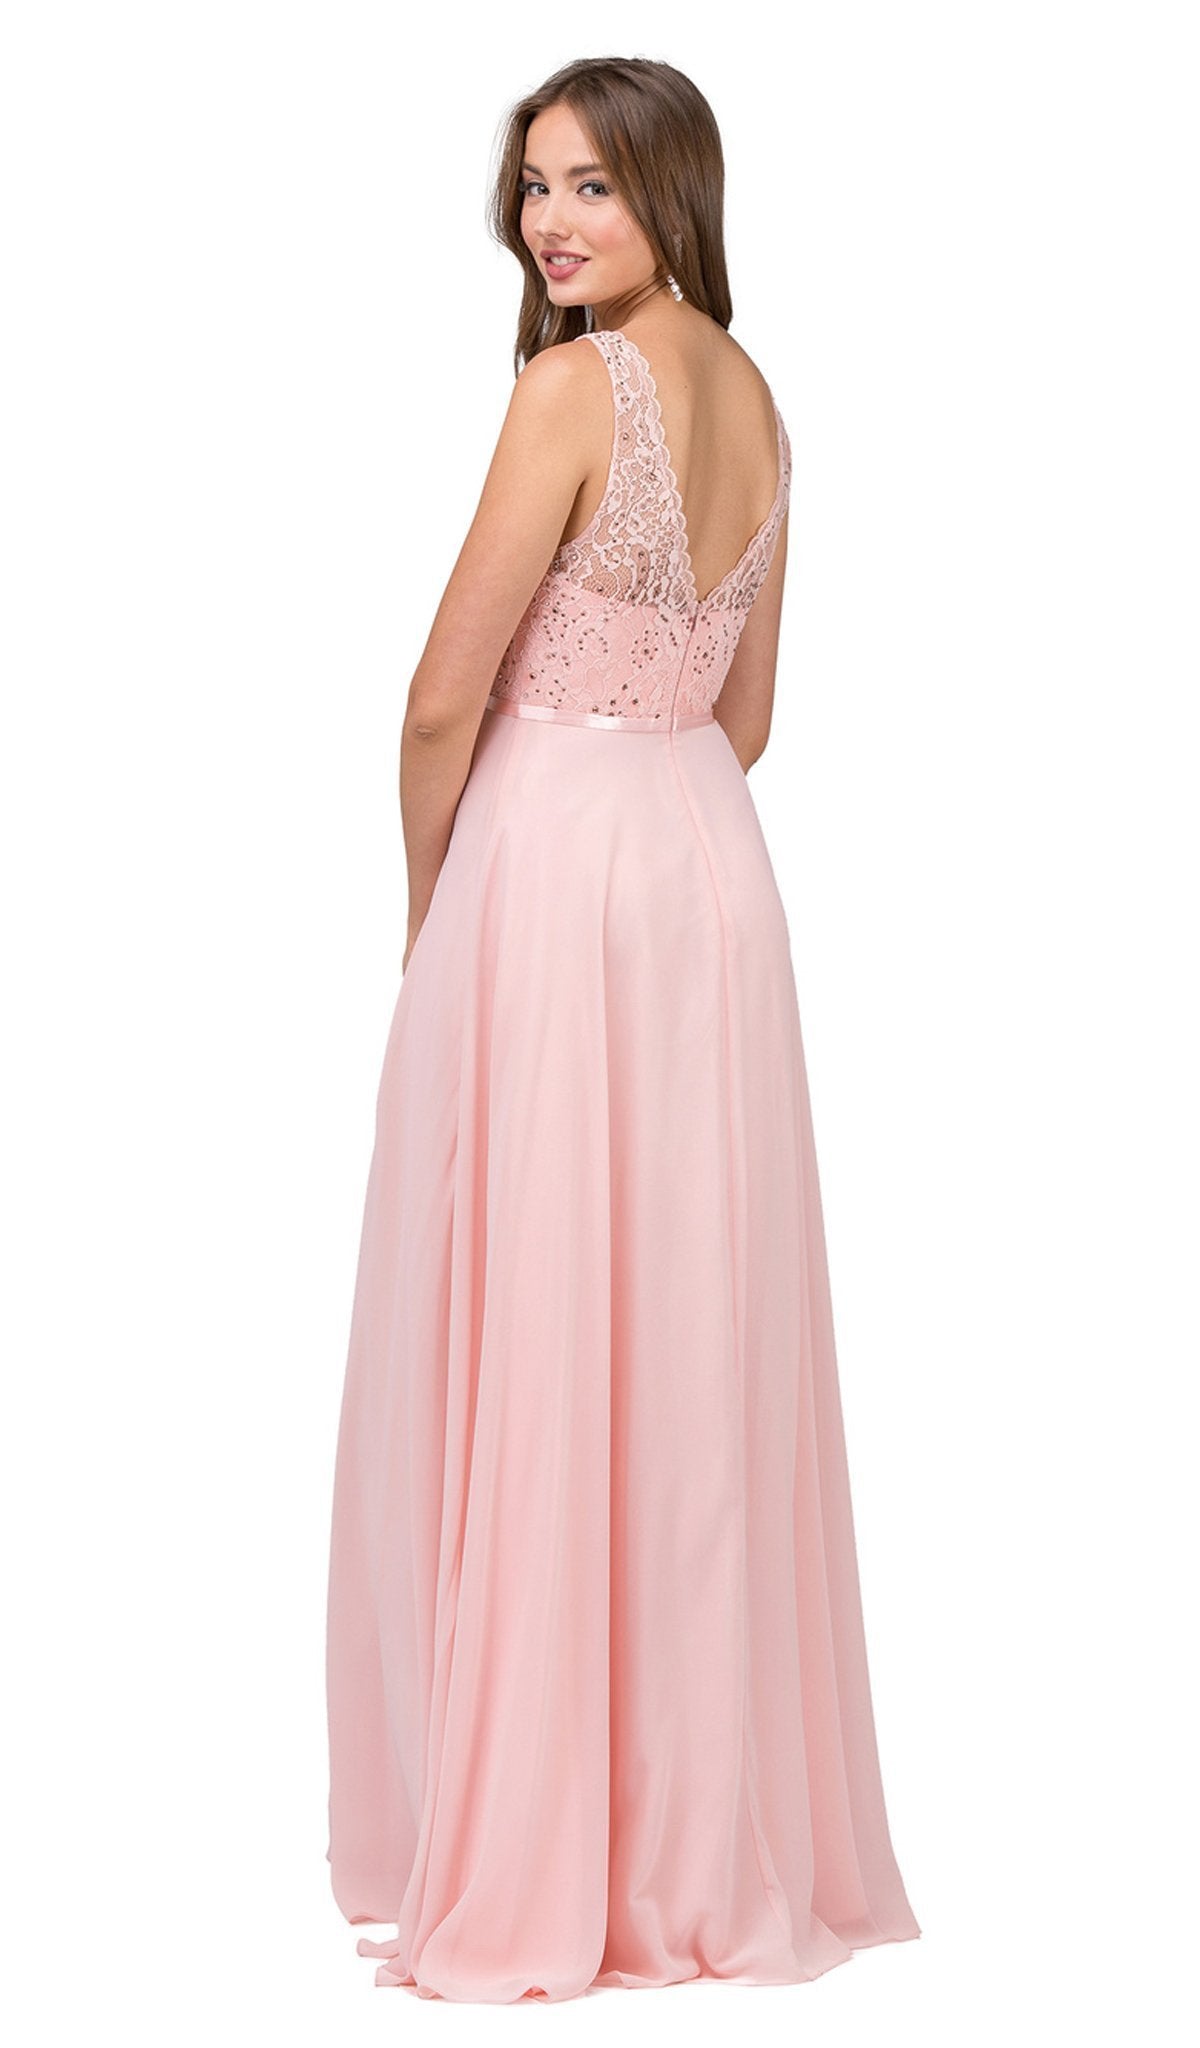 Dancing Queen - 2267 Sleeveless Scalloped Lace Illusion Prom Gown in Pink